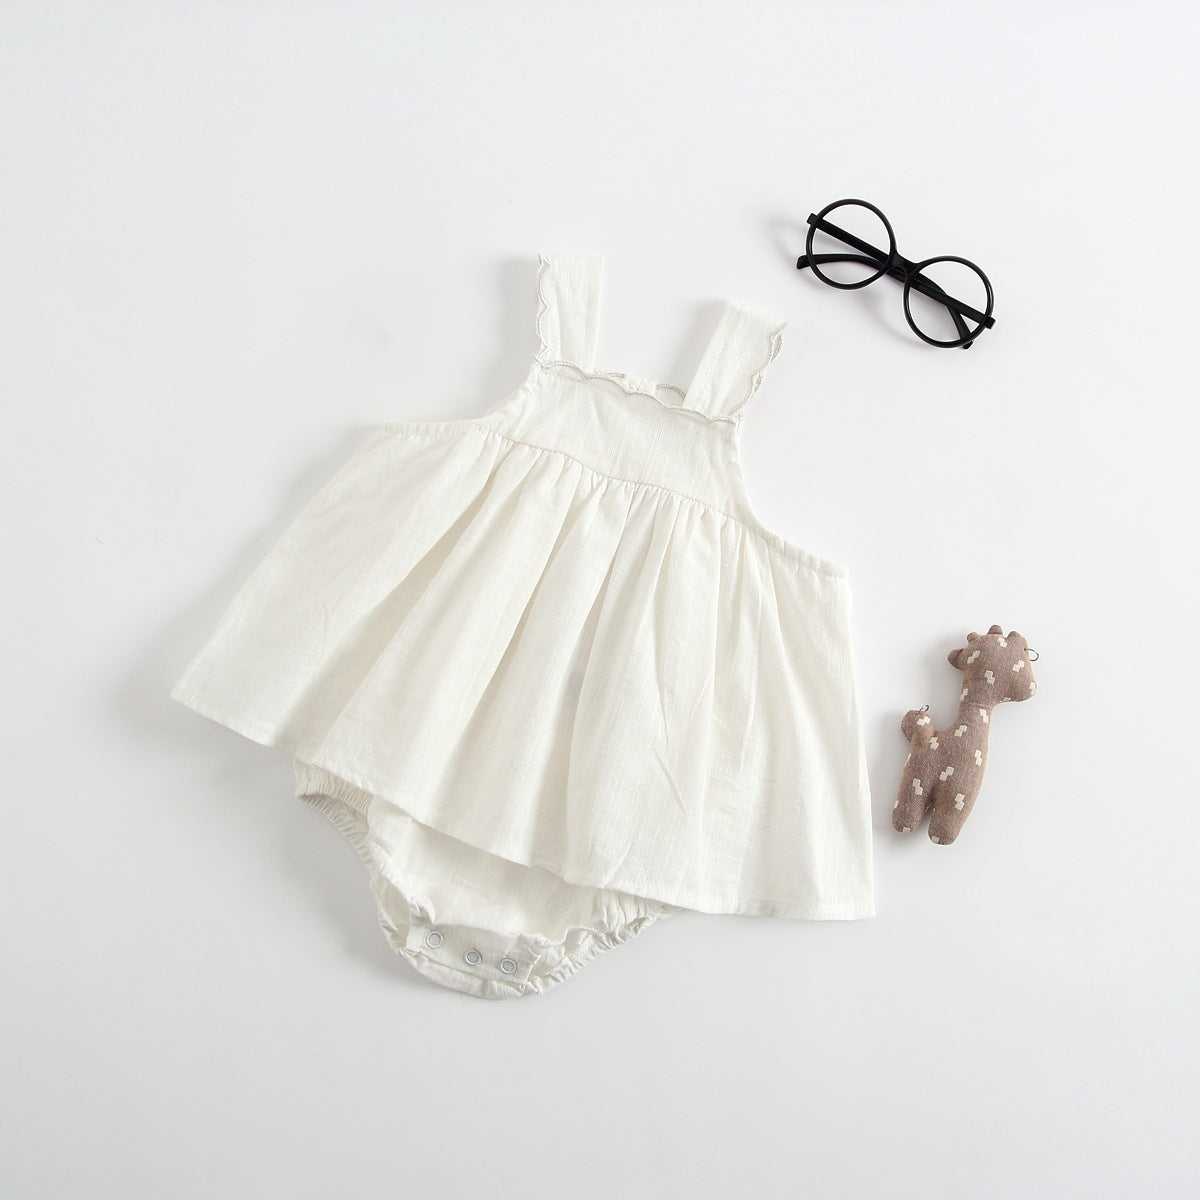 Baby Dress Baby One-piece Sling Bag Clothes